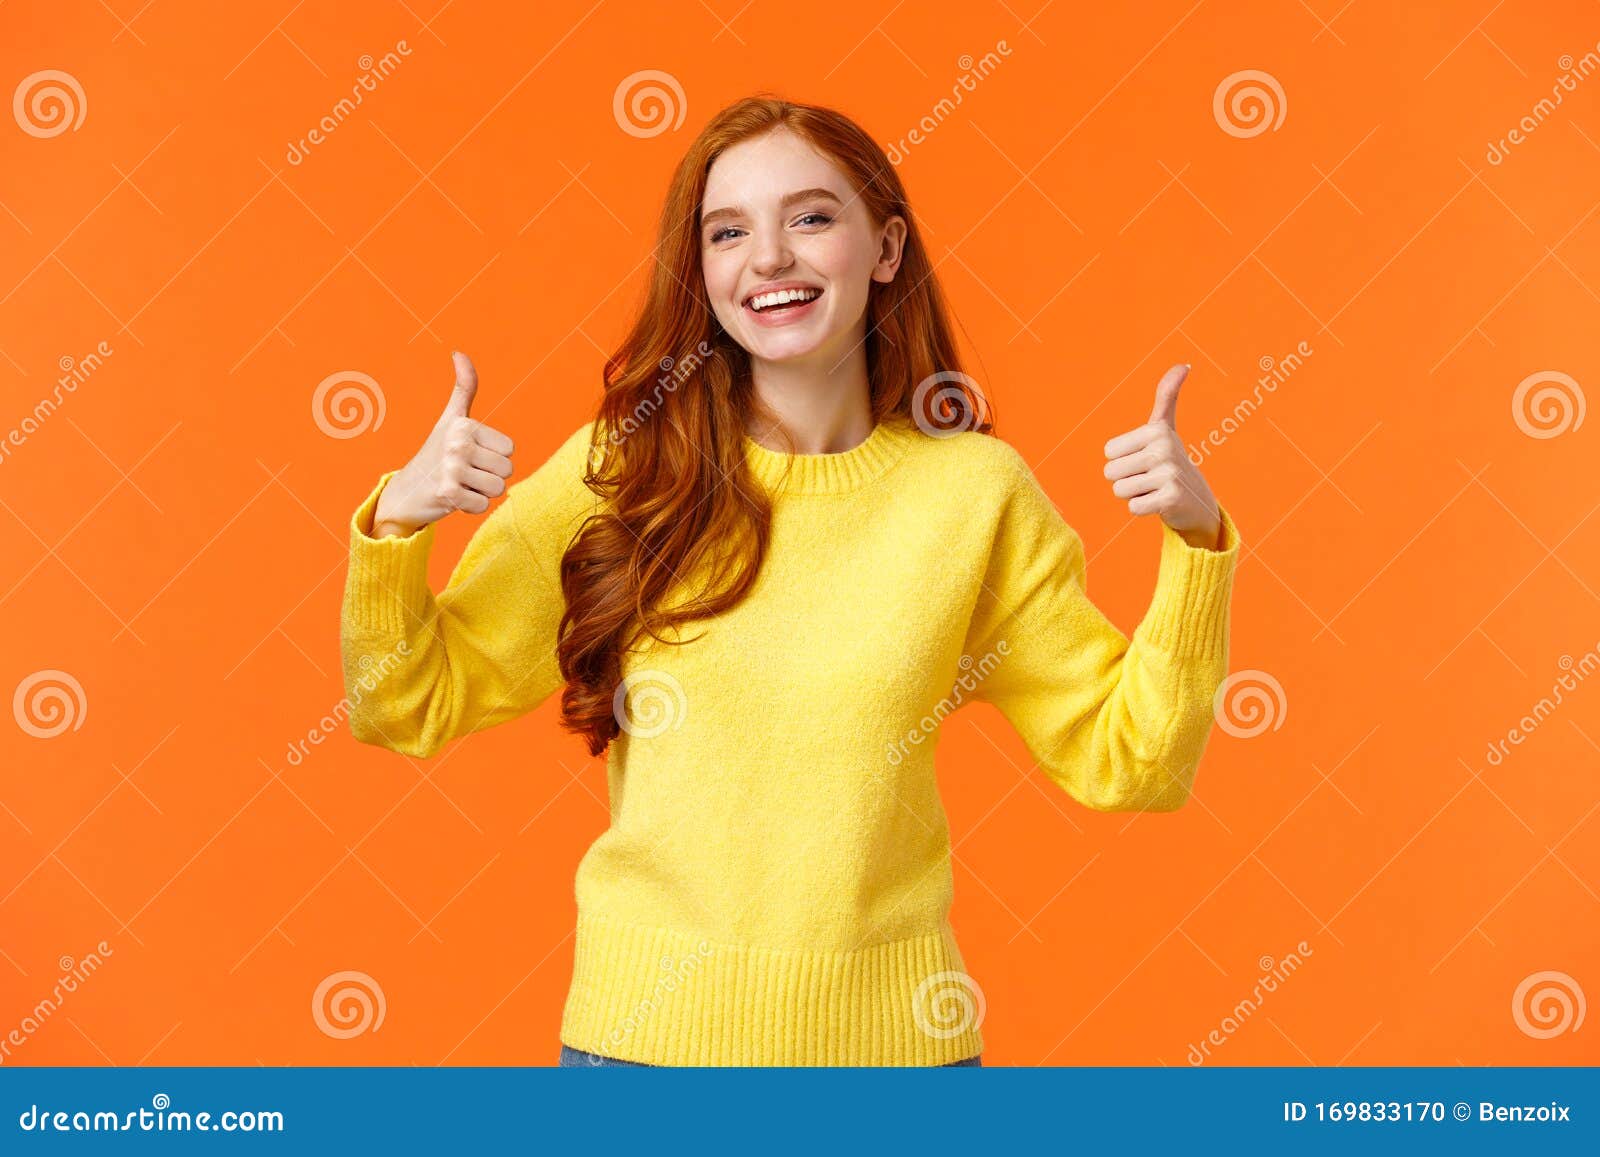 Holidays, Gestures, People Concept. Cheerful Cute Redhead Girl Smiling ...